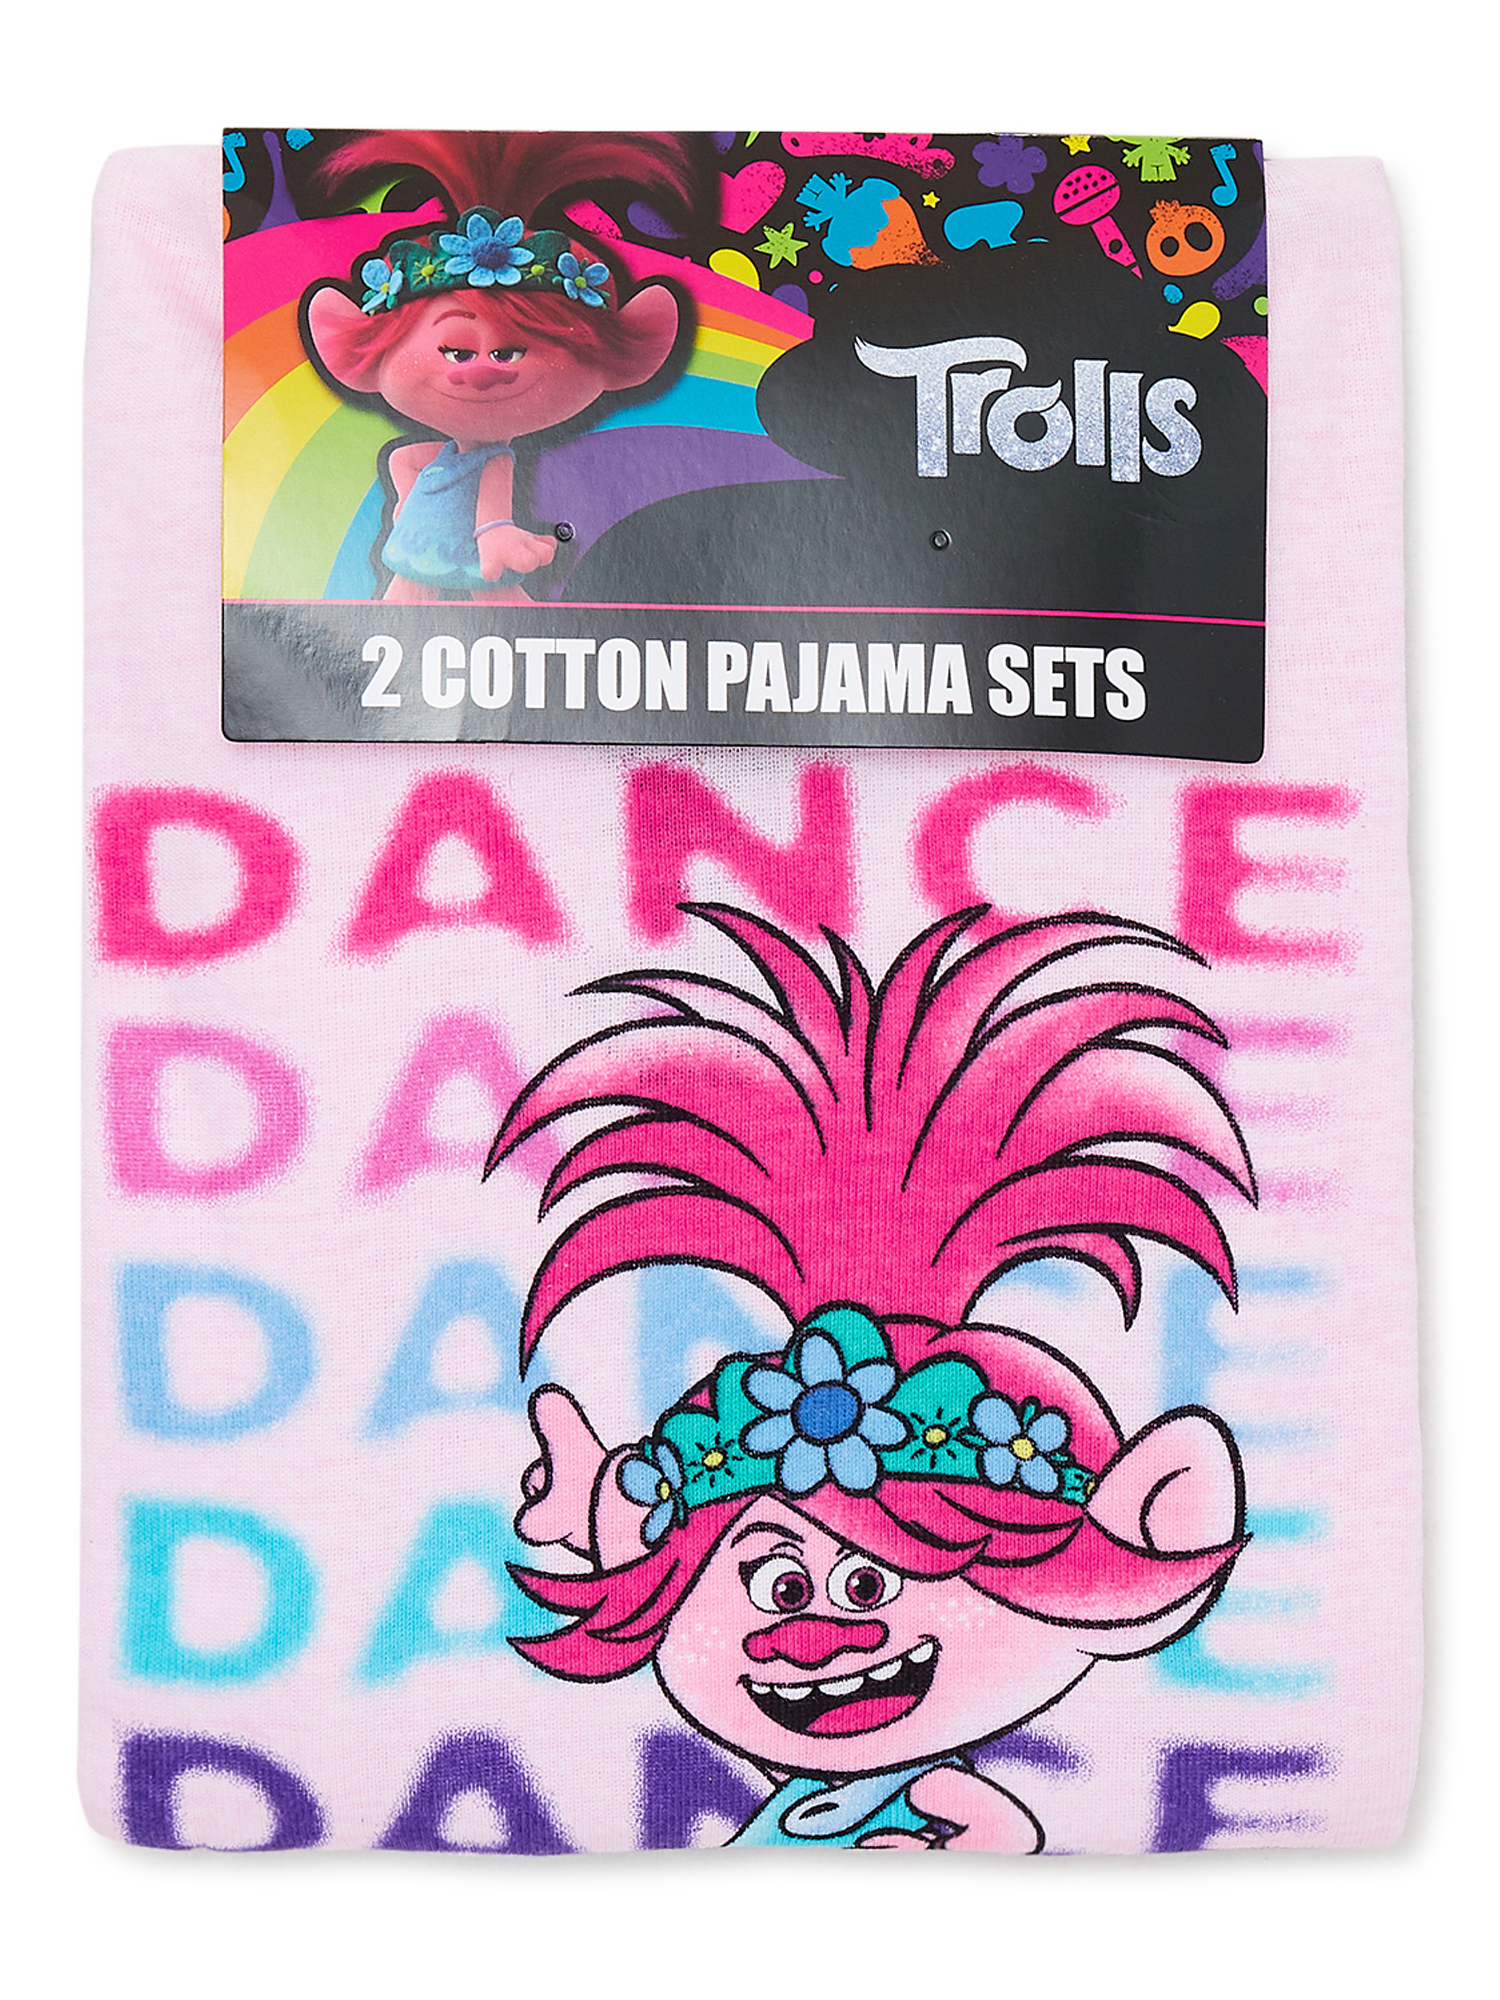 Trolls 2 Toddler Girls Long Sleeve Tops and Pants, 4-Piece Pajama Set, Sizes 2T-4T - image 4 of 4